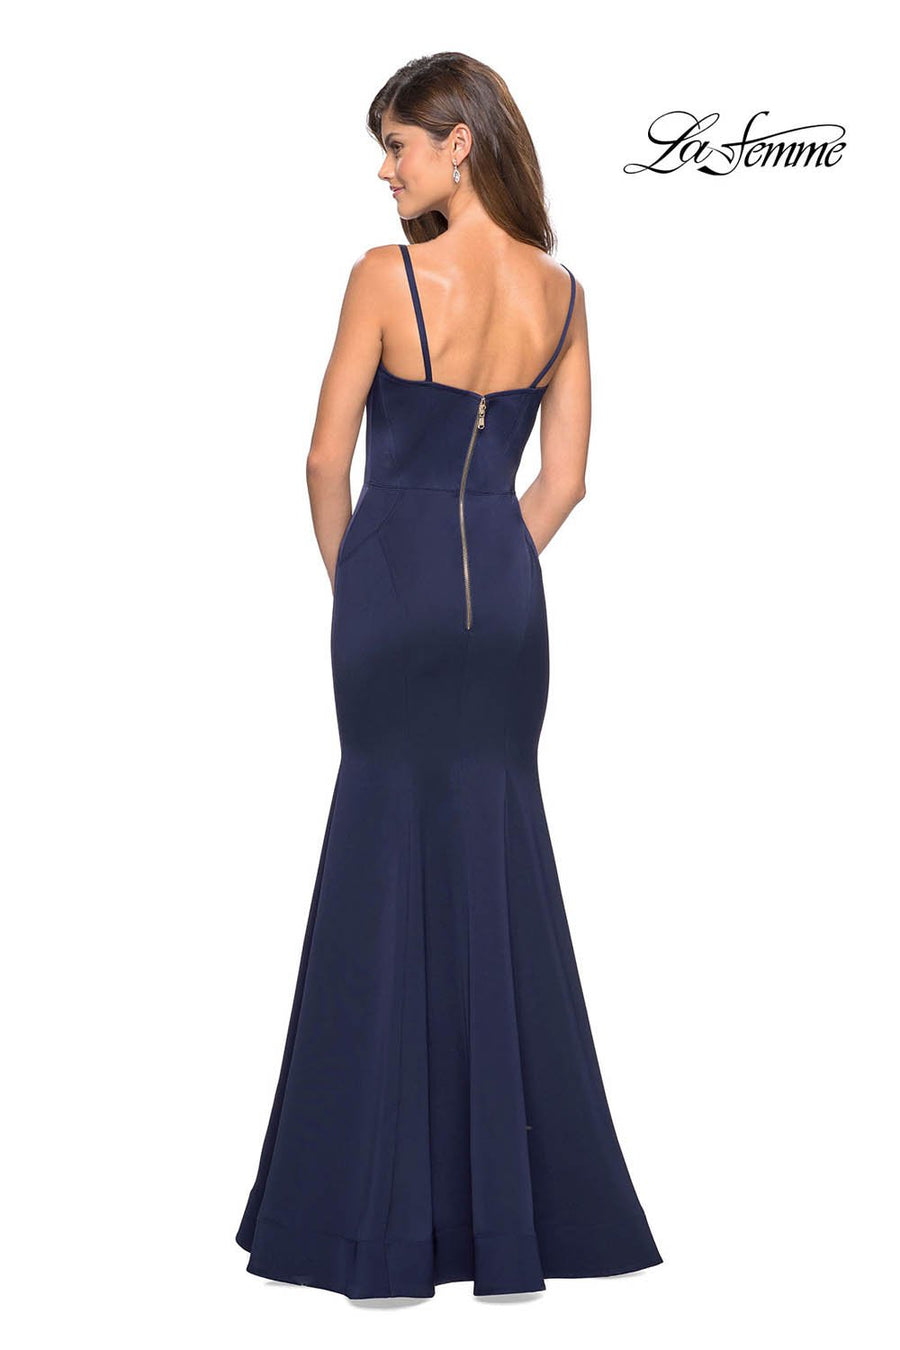 La Femme 27524 prom dress images.  La Femme 27524 is available in these colors: Burgundy, Evergreen, Mauve, Navy.